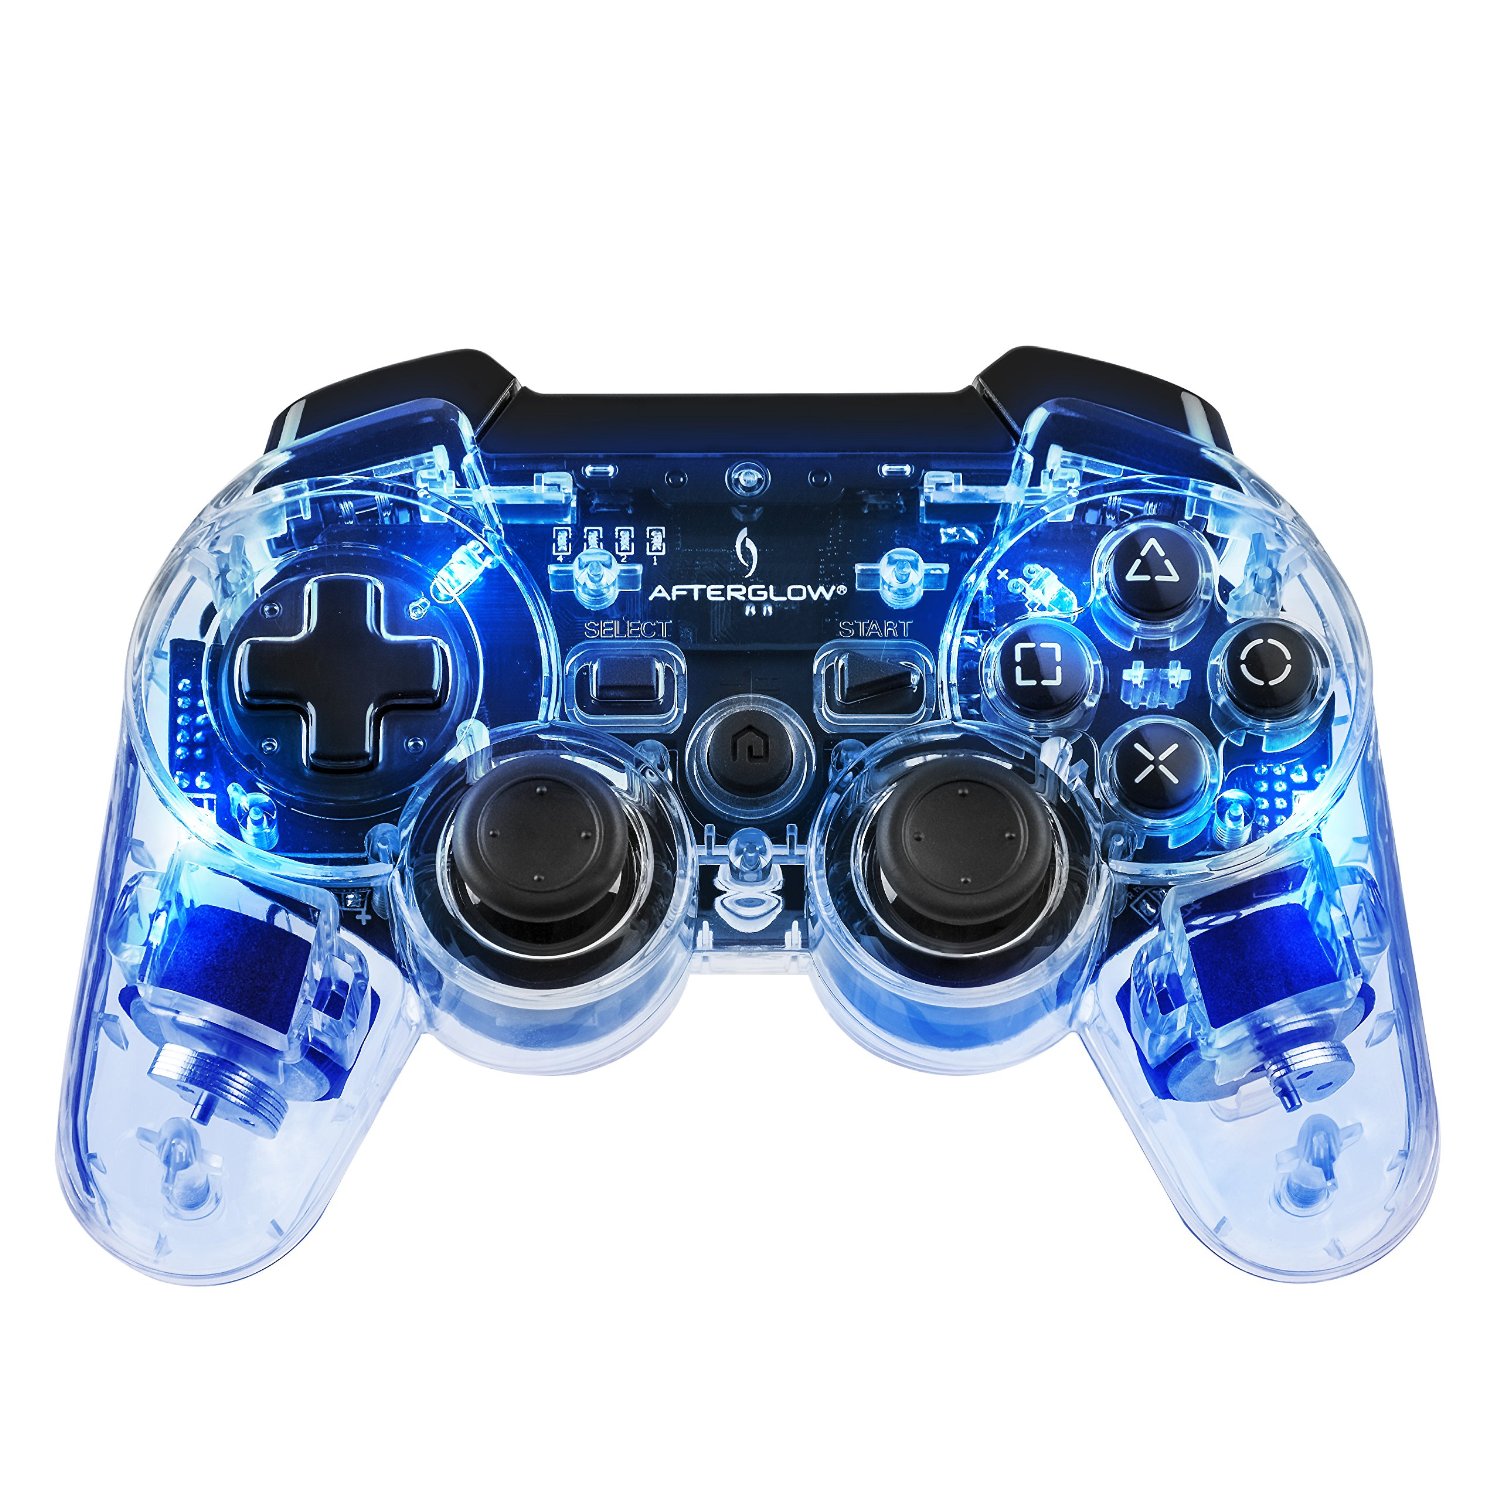 Afterglow Wireless Controller: Signature Blue - PS3, PC - image 1 of 5